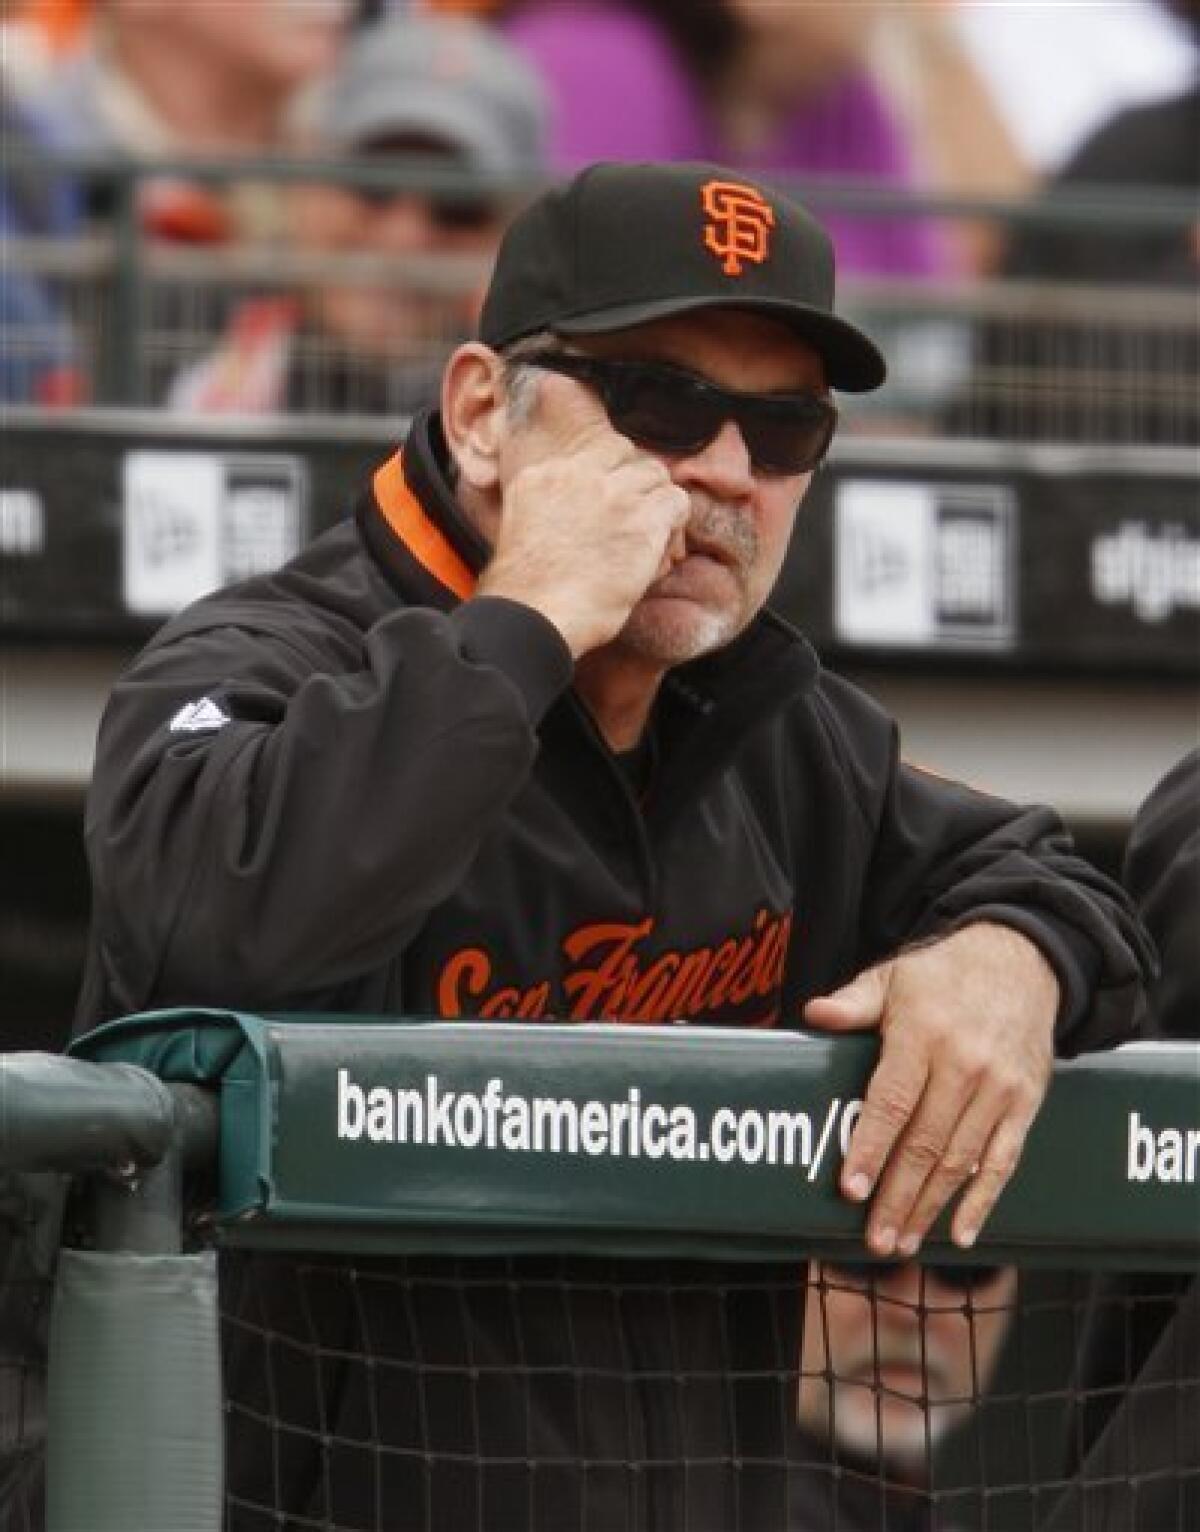 Bochy's quest to quit dipping is a tough haul - The San Diego Union-Tribune